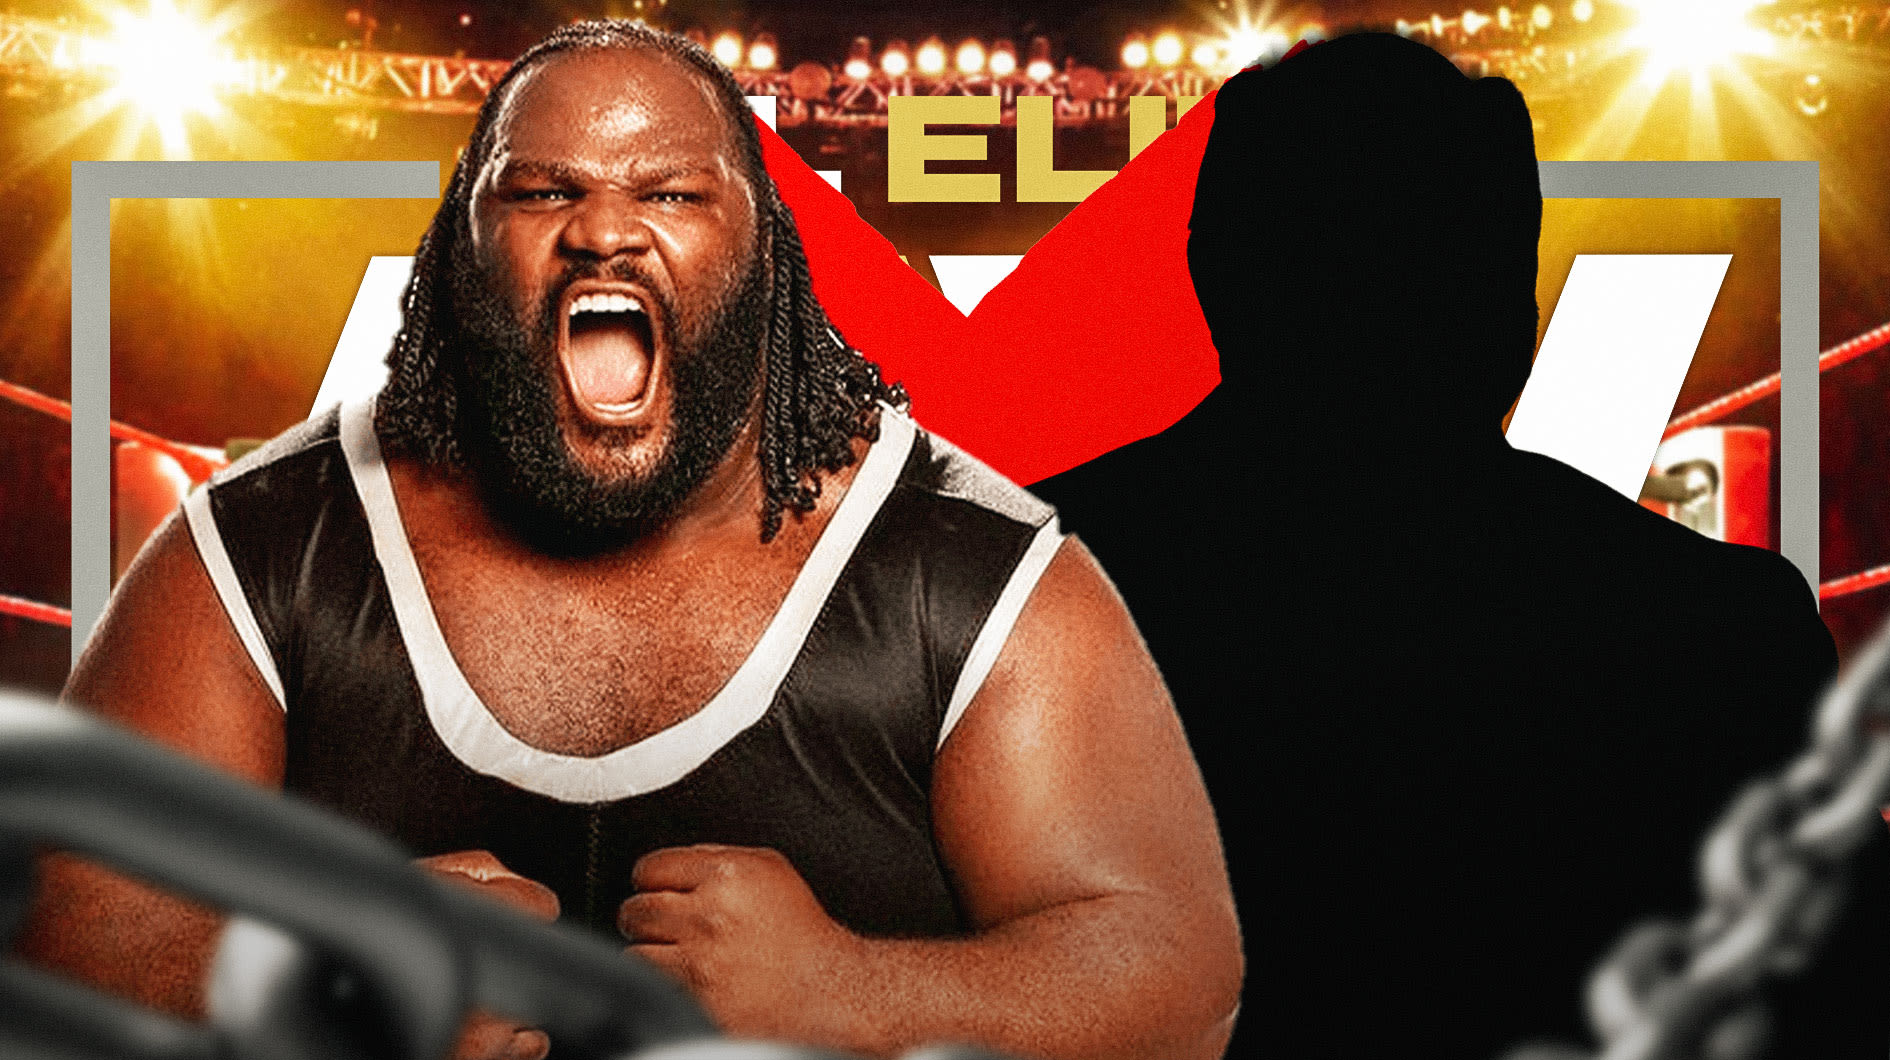 Another legend is set to leave AEW alongside Mark Henry when their contract expires